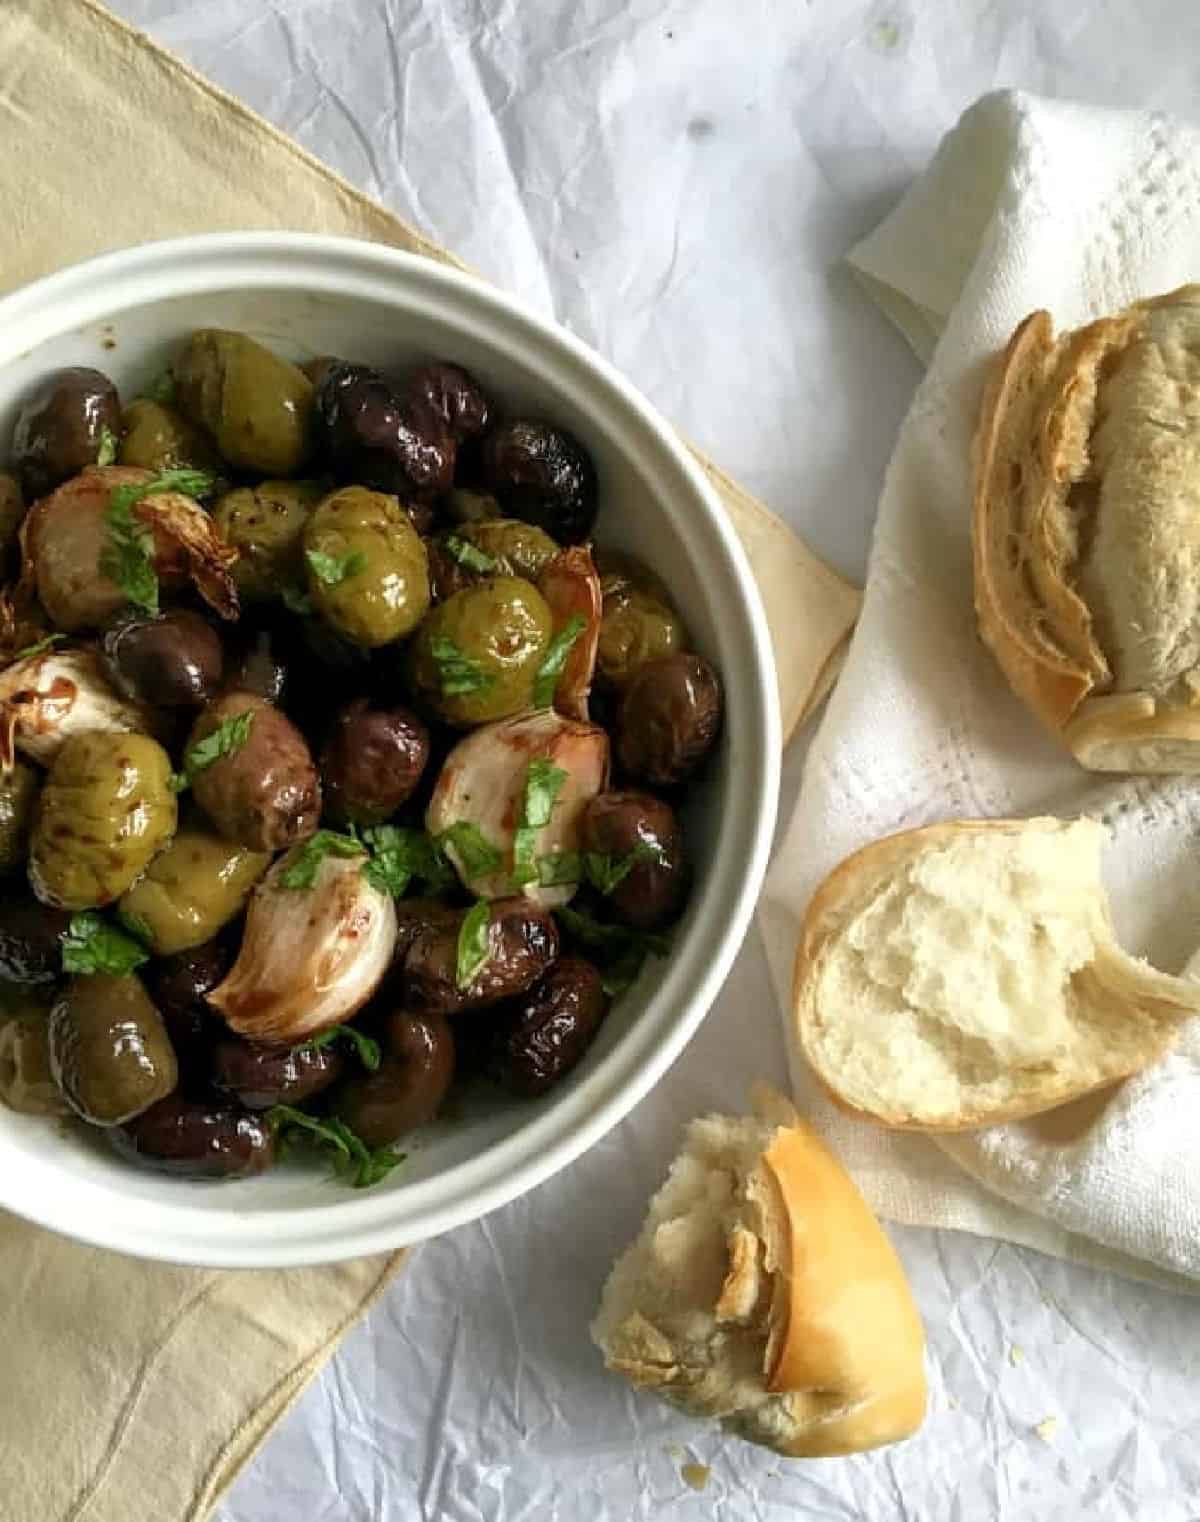 Pieces of french bread beside white bowl with olives and garlic on a white and beige cloth. 